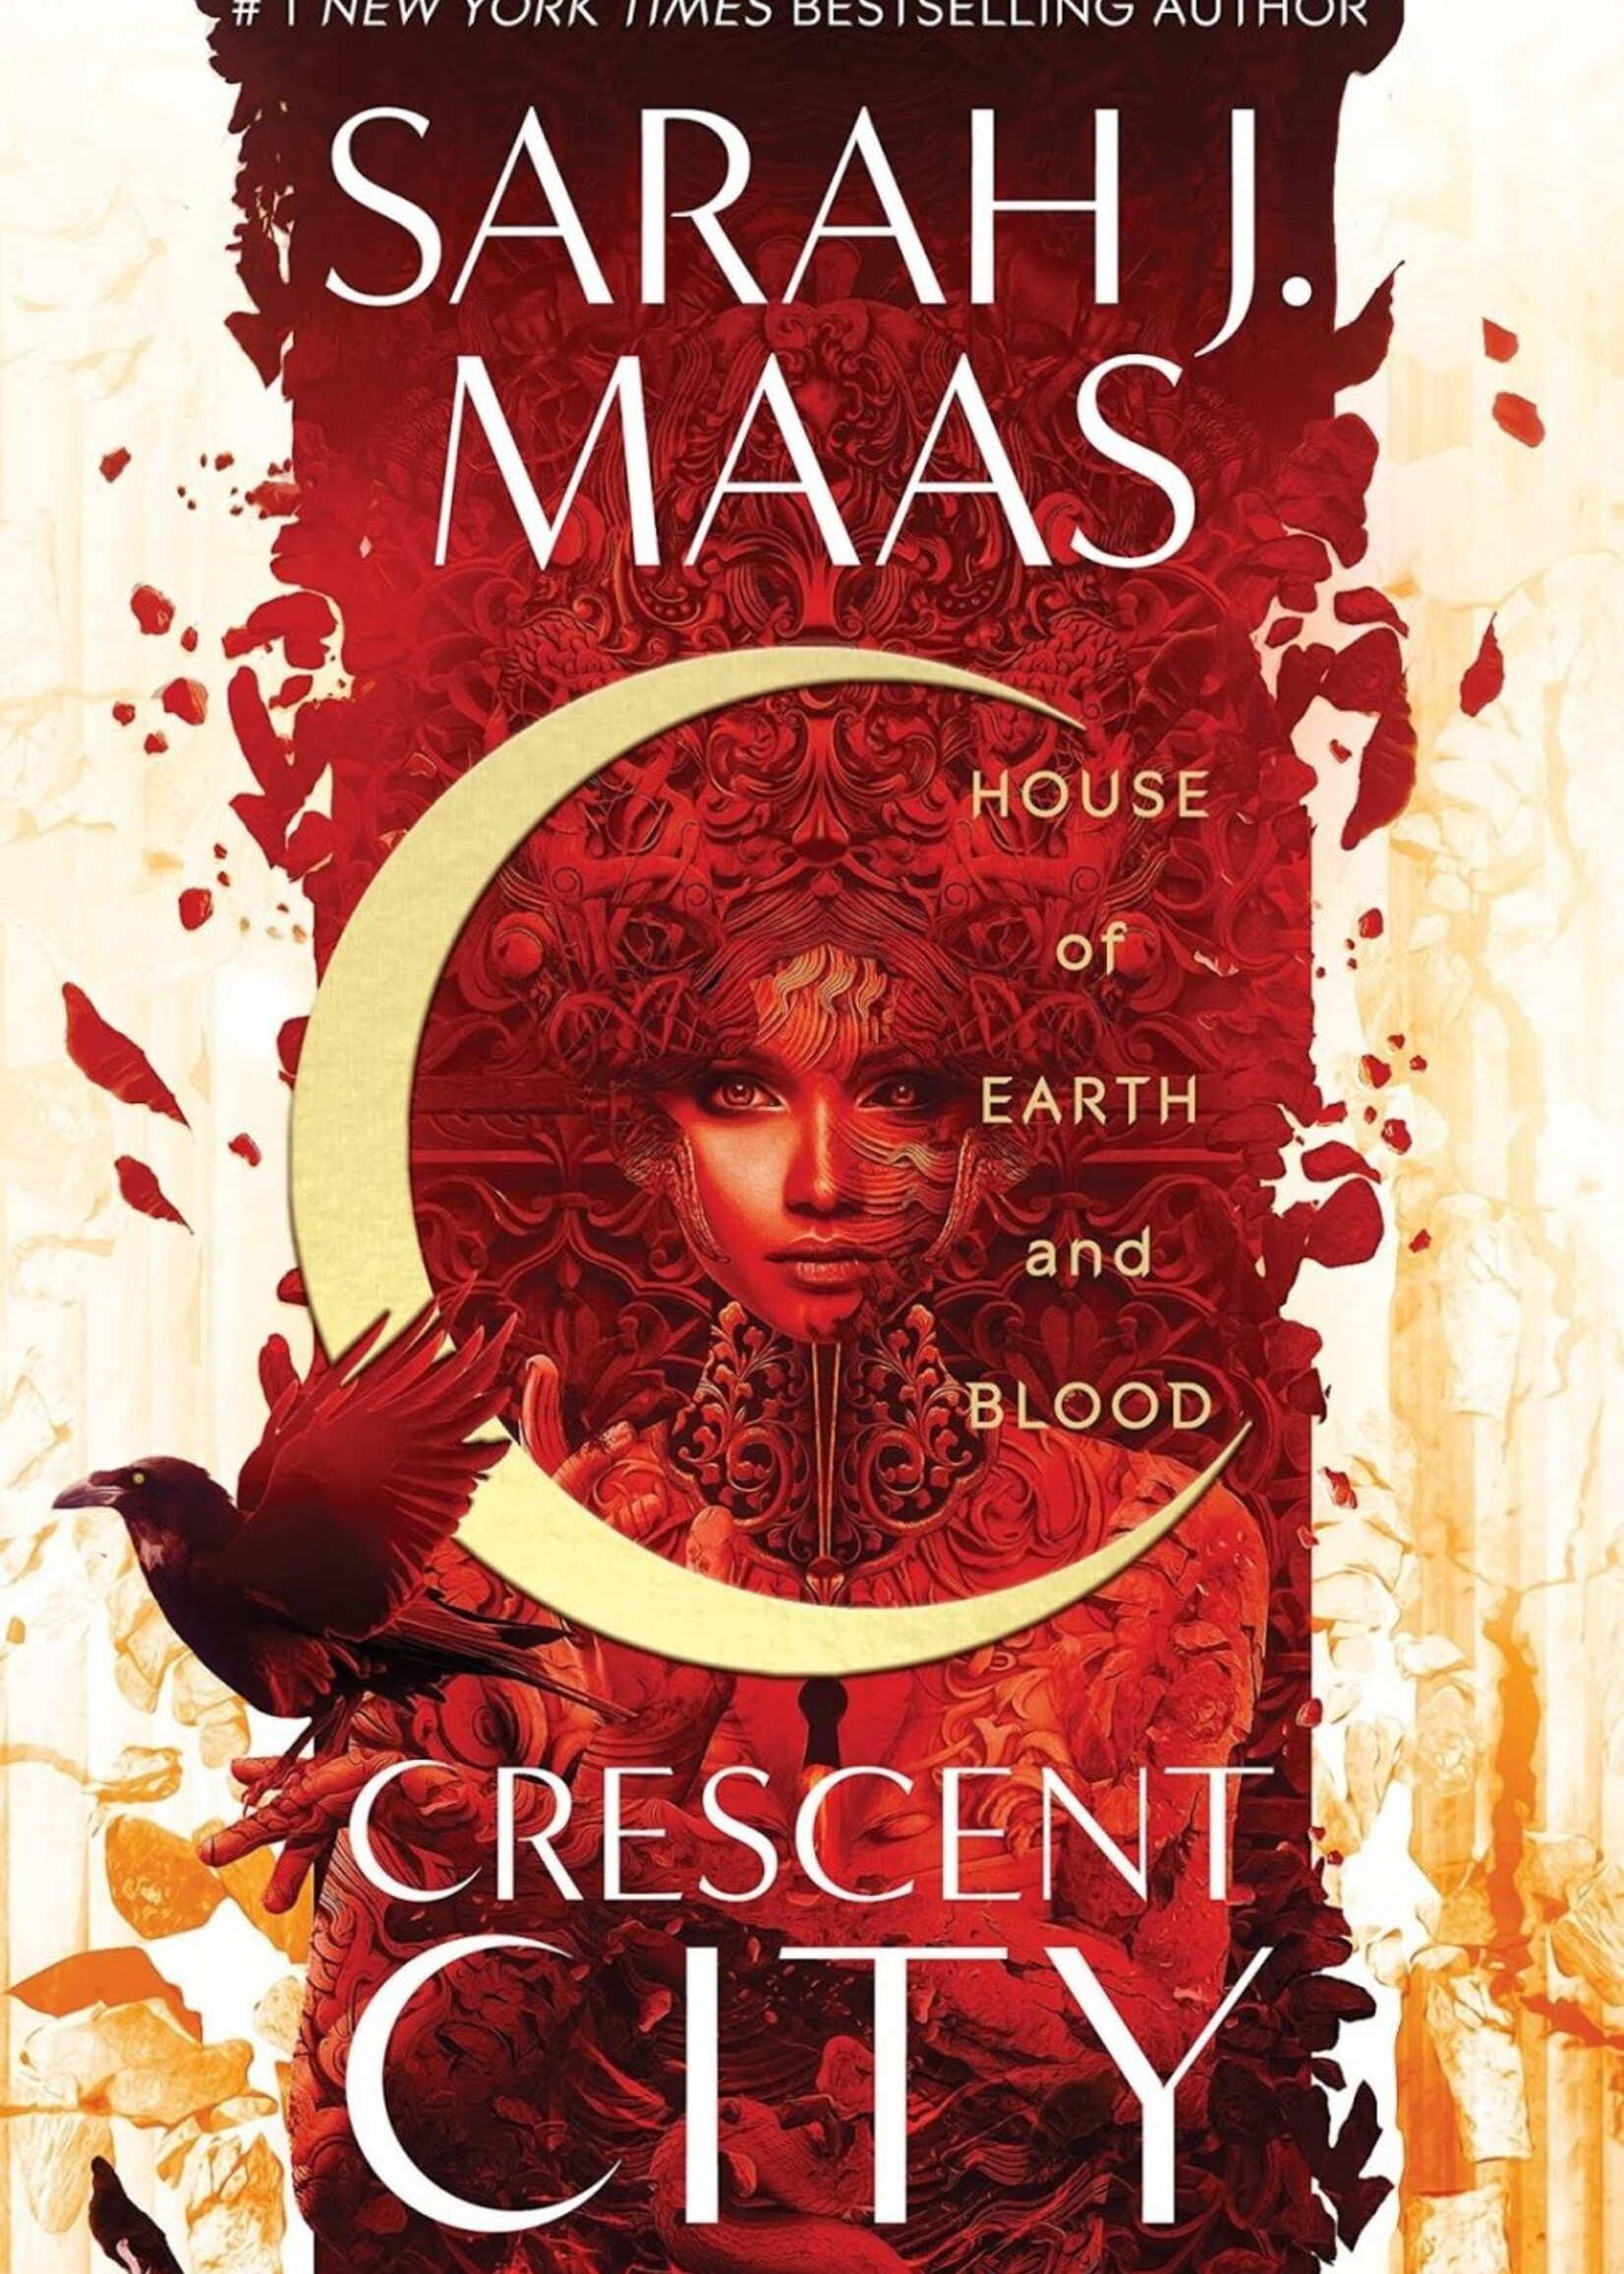 Bloomsbury House of Earth and Blood (Book #1 in the Crescent City Series)